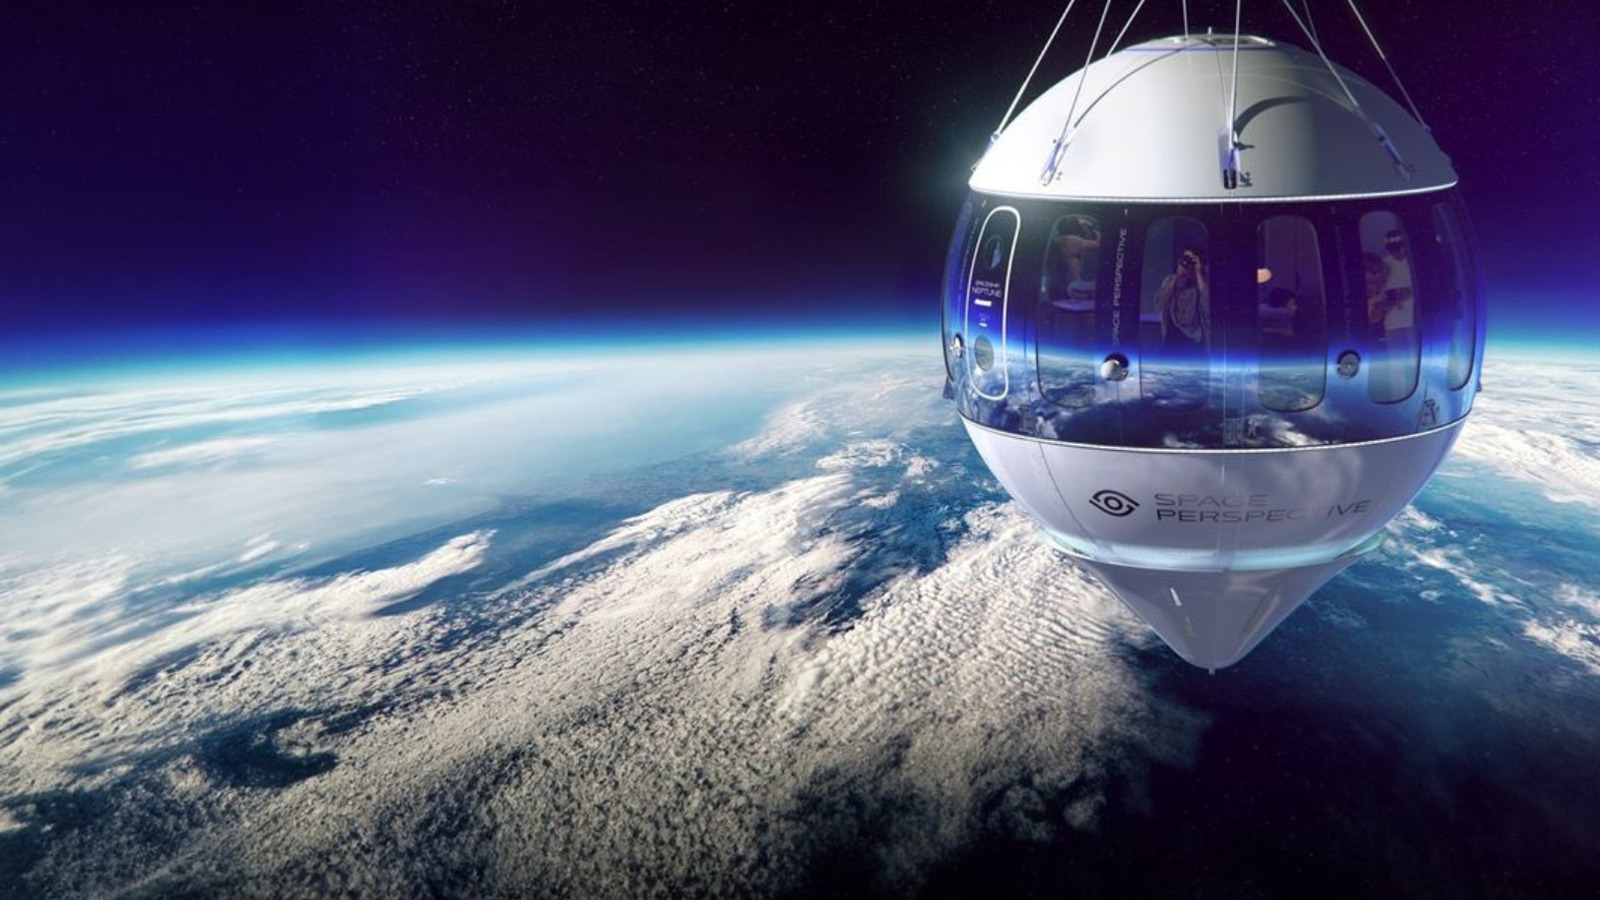 The World's Most Luxurious Meal Costs $495,000 and will be Served in a Space Balloon